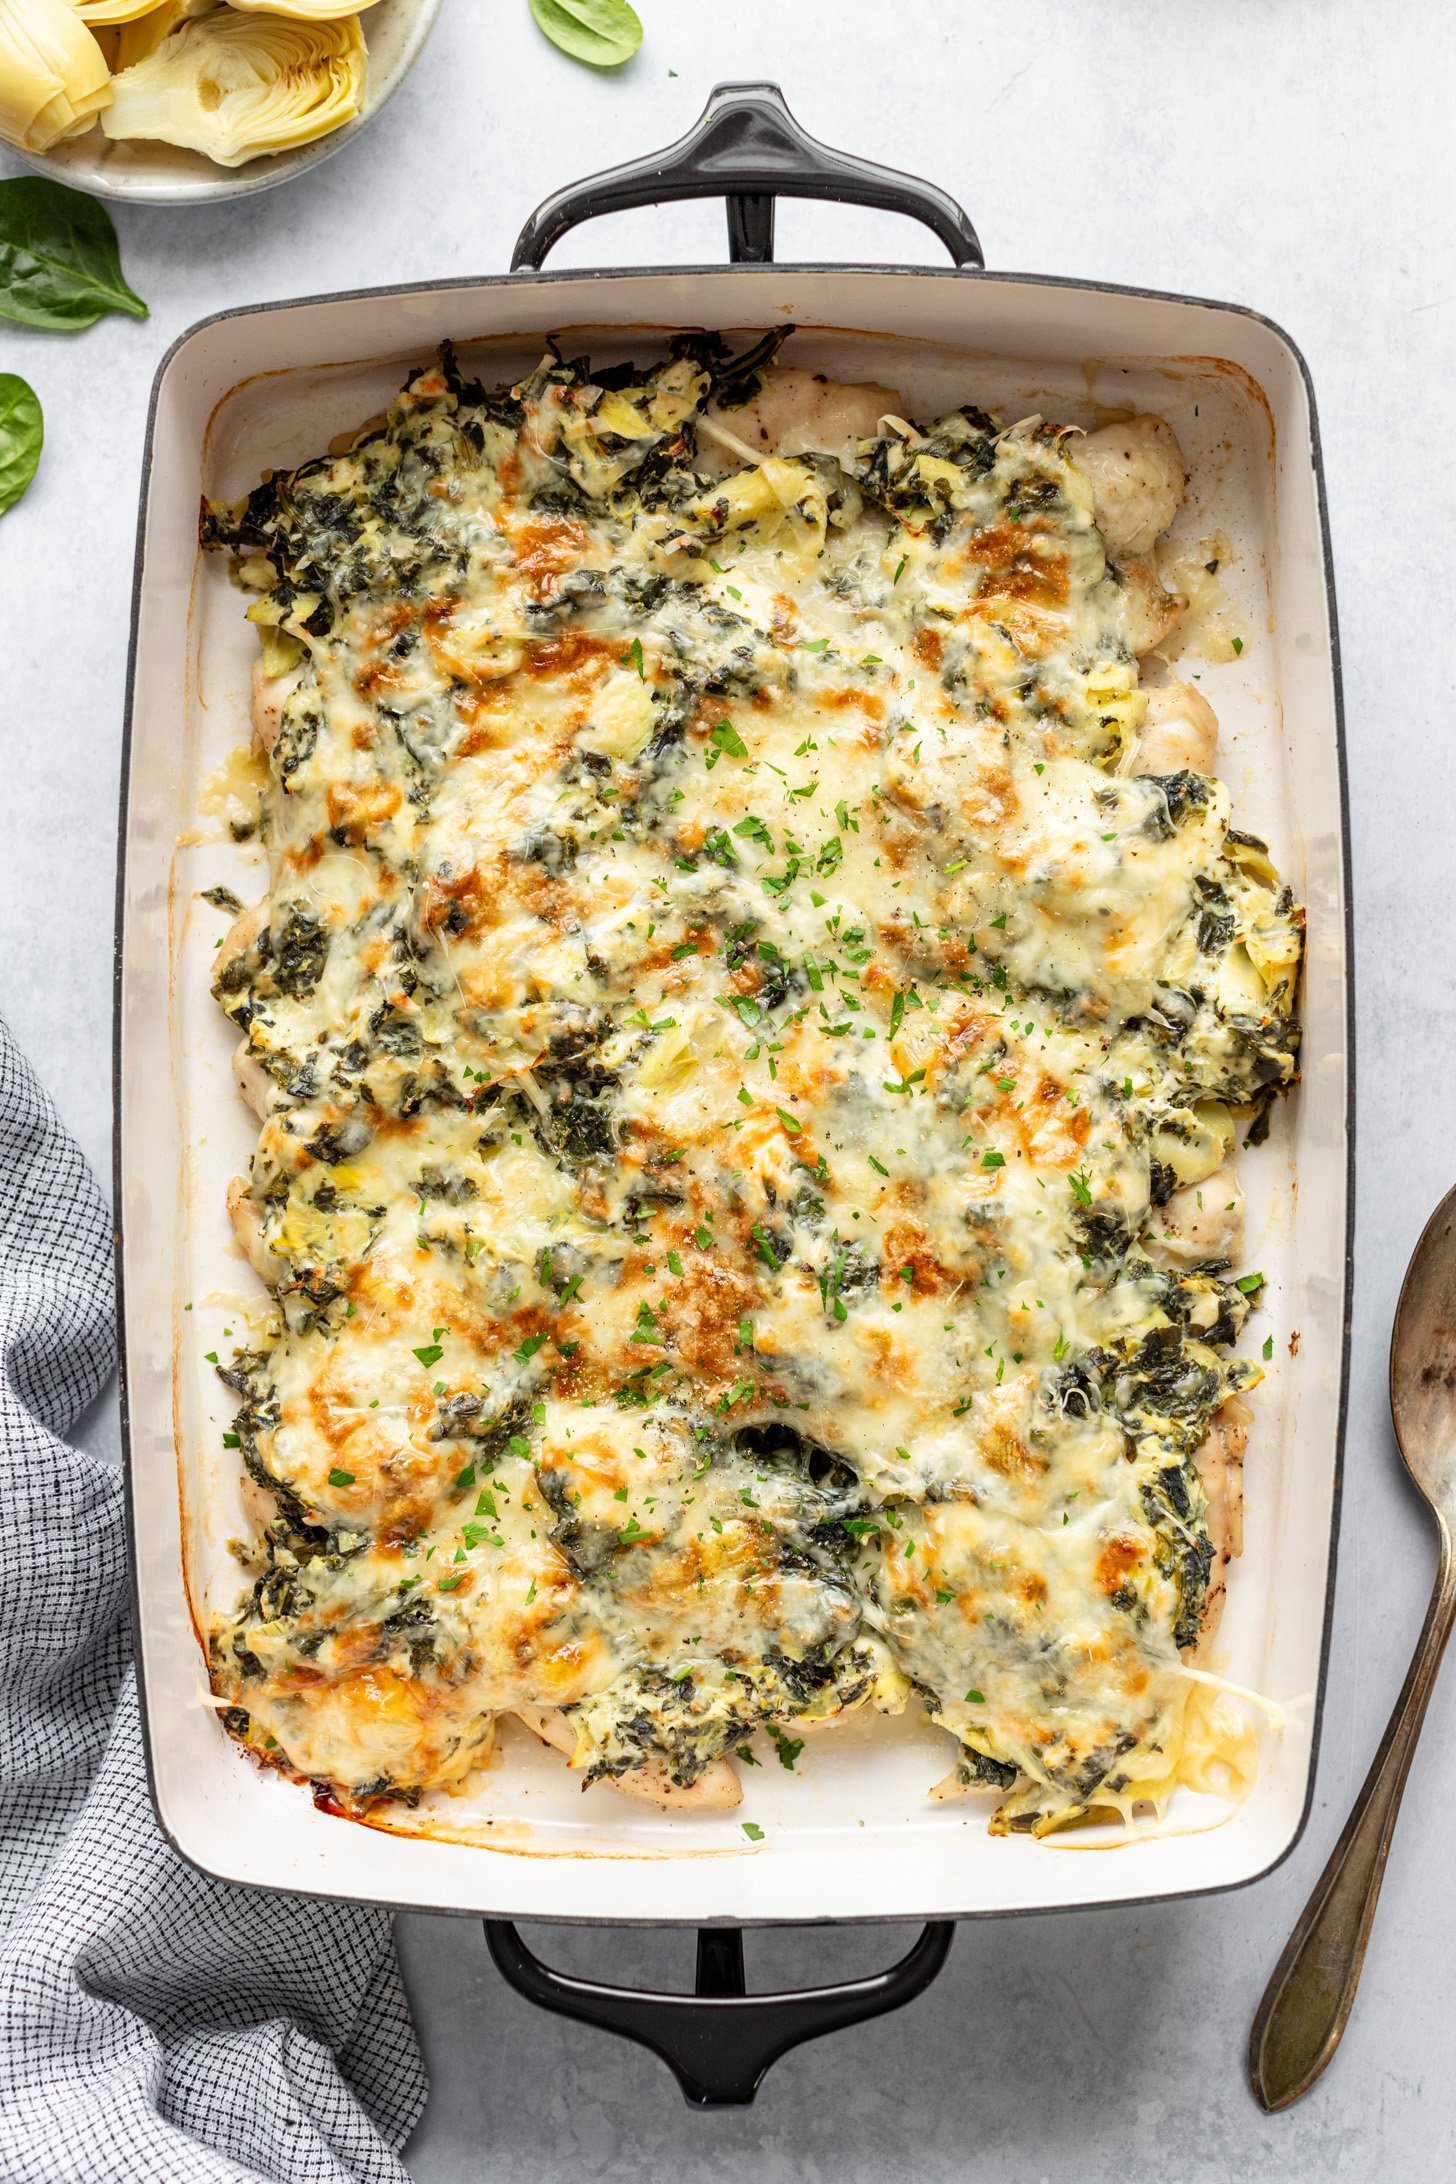 Casserole dish filled with cooked Creamy Chicken Spinach Artichoke Bake sitting on countertop. Casserole dish is surrounded by a napkin, serving spoon, a small dish containing artichoke hearts, and a few spinach leaves strewn about on countertop.